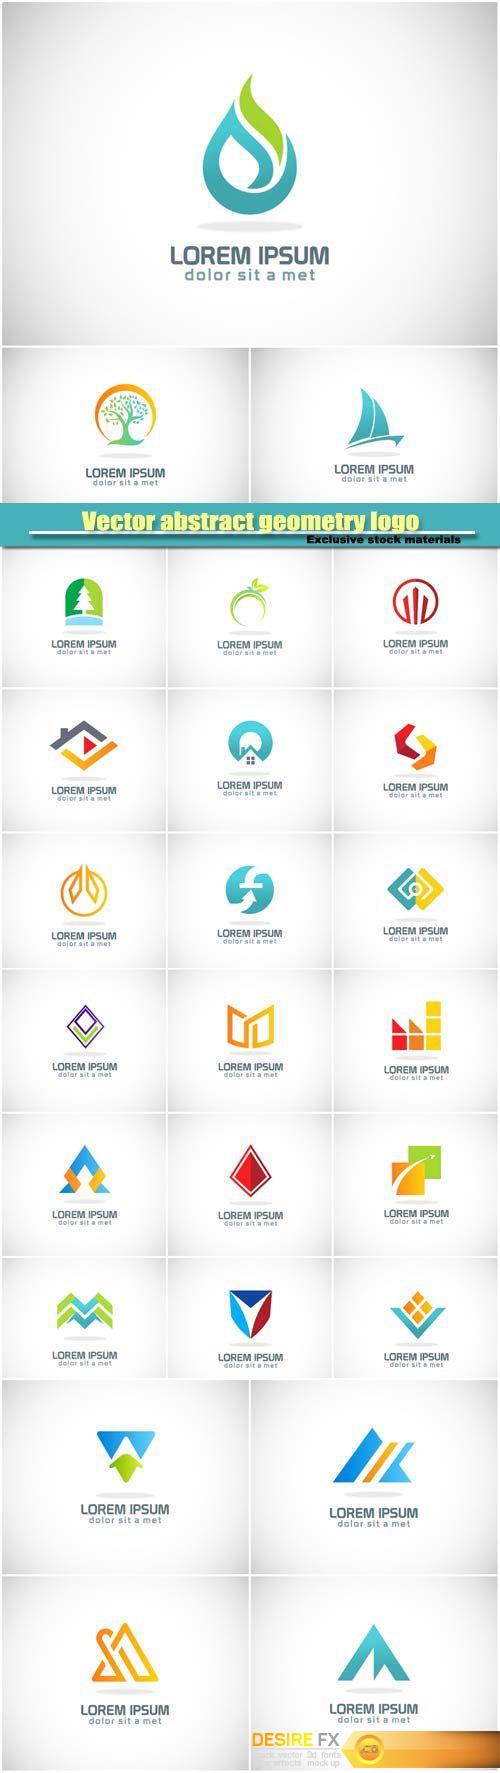 Download Vector round abstract shape geometry logo | DesireFX.COM